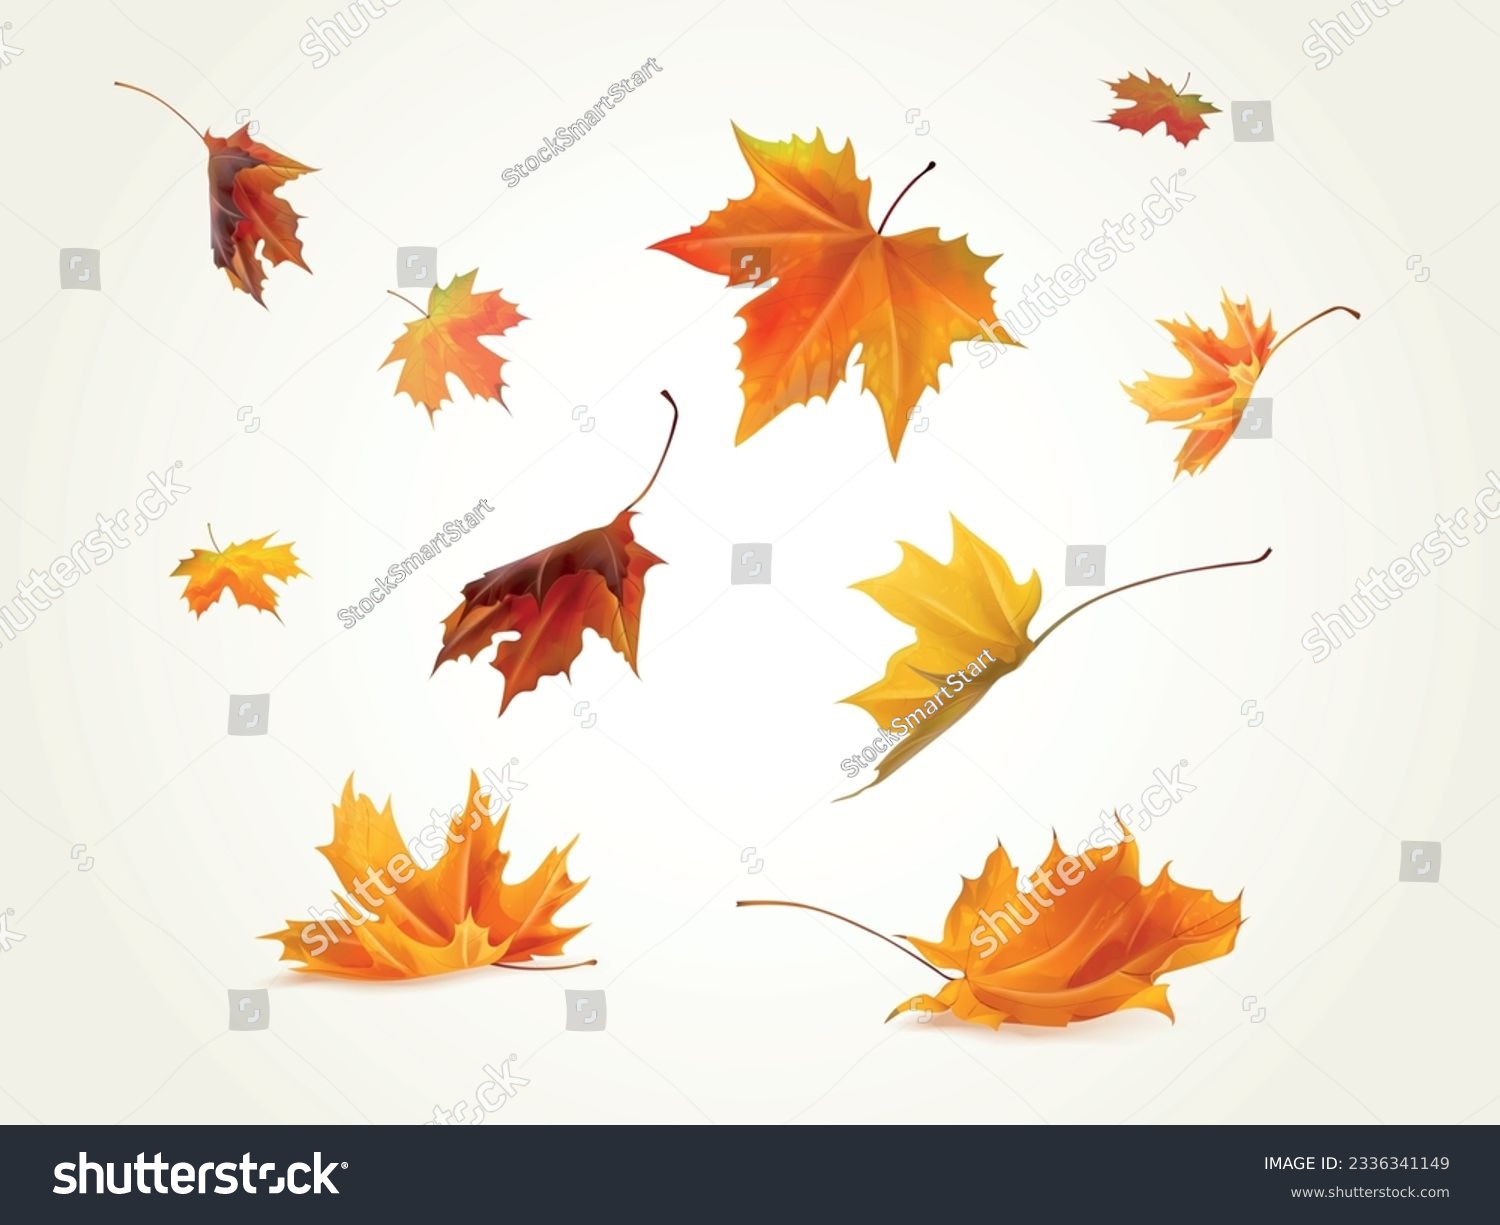 Realistic falling leaves. Autumn forest maple leaf in september season, flying orange foliage from tree on ground transparent background isolated template exact vector illustration of fall autumn #2336341149